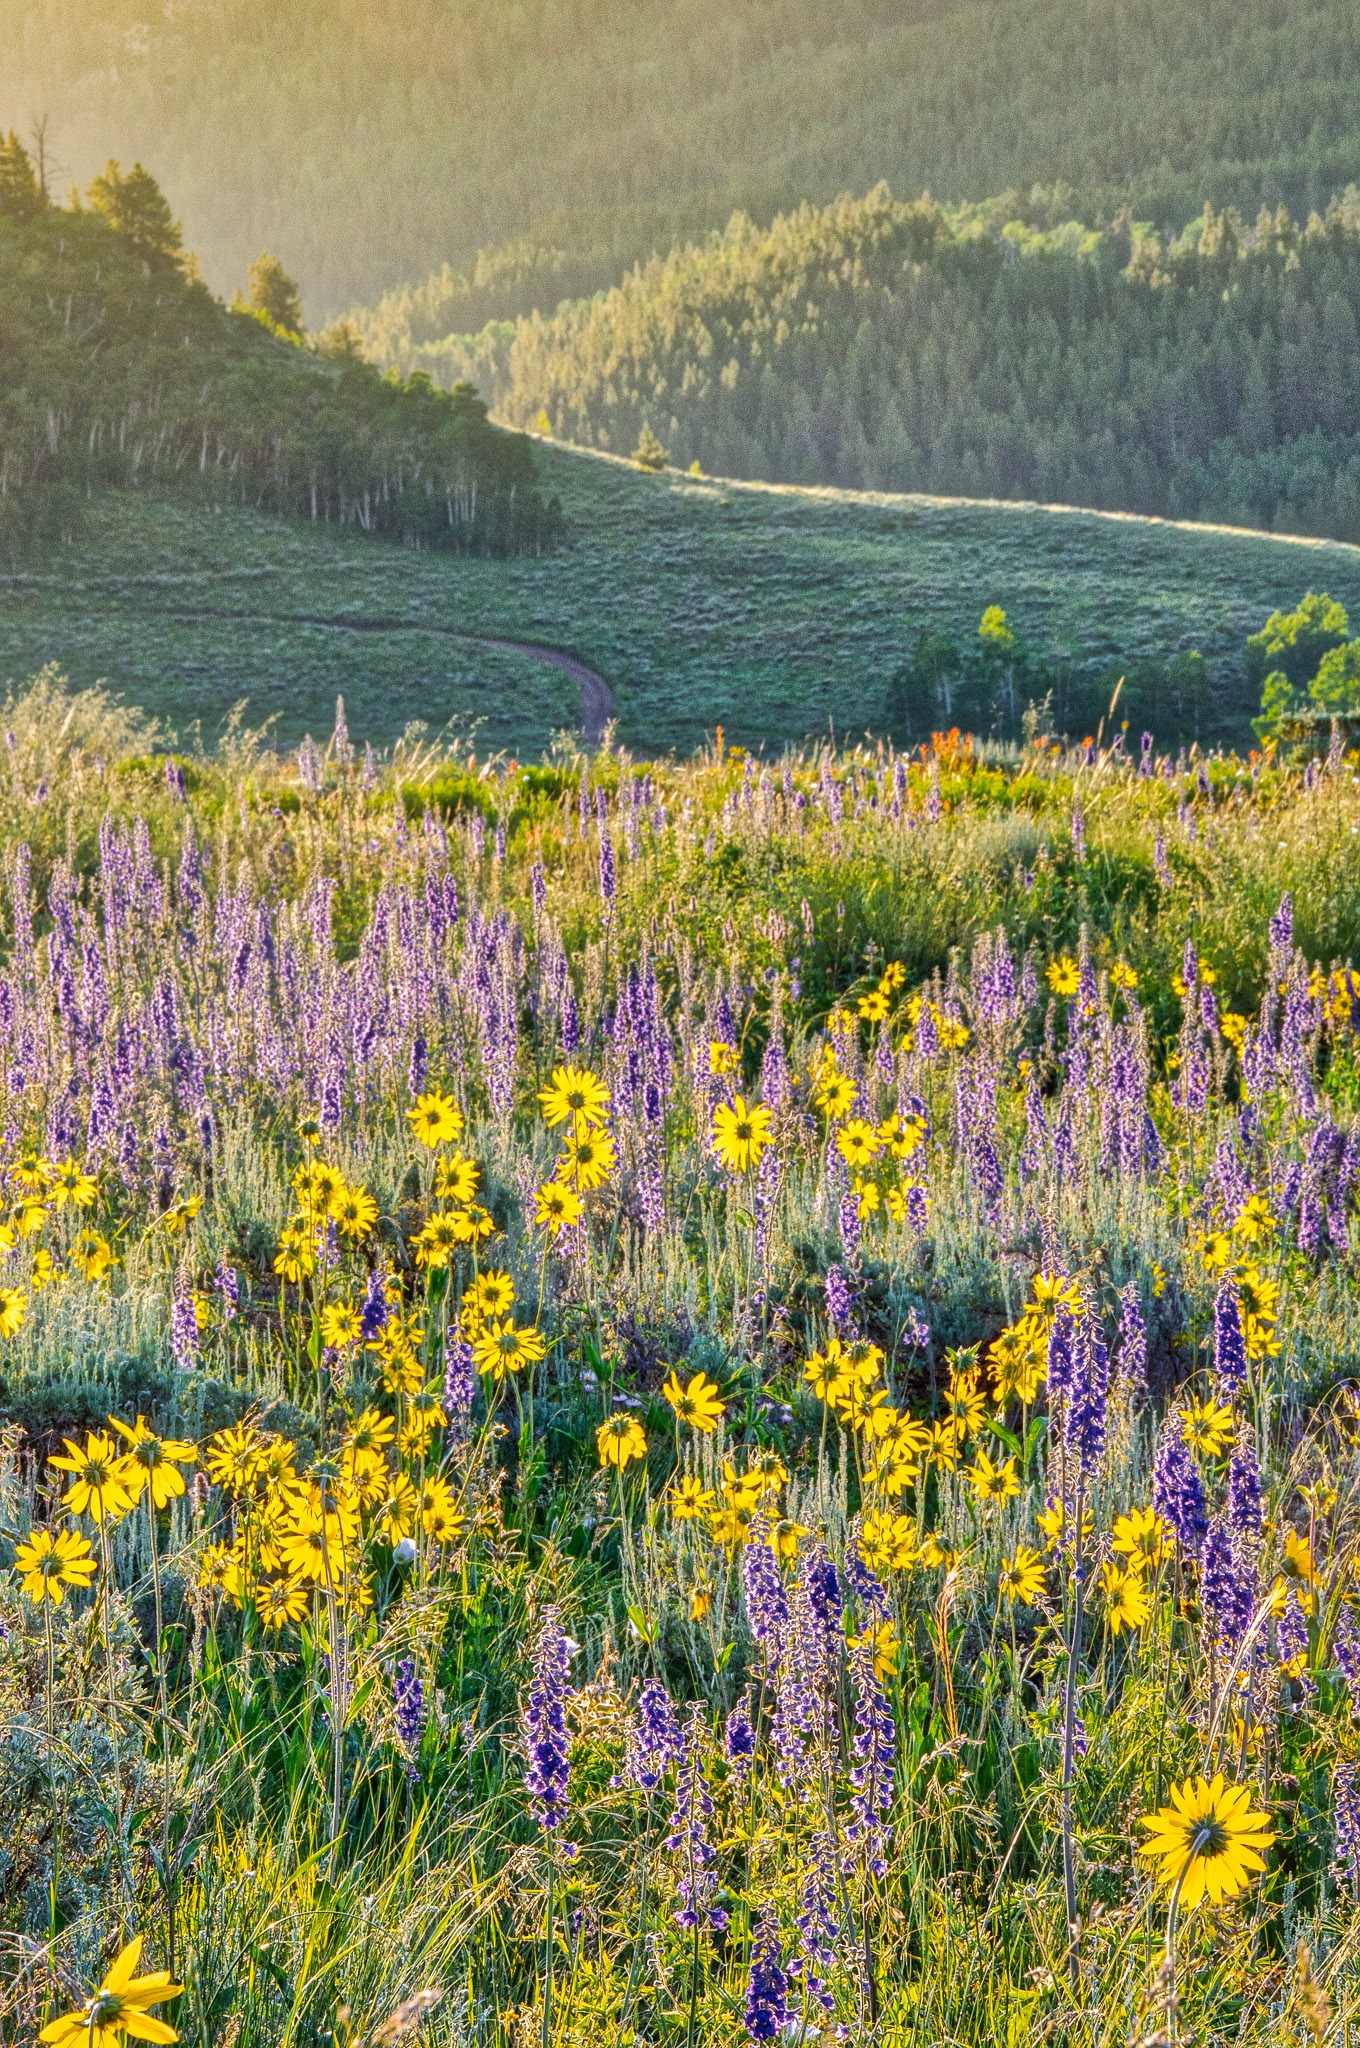 Aspen Sunflowers, growing among Geyer Larkspur, turn their heads toward the rising sun along West Brush Creek Road near Mount Crested Butte, Colorado.